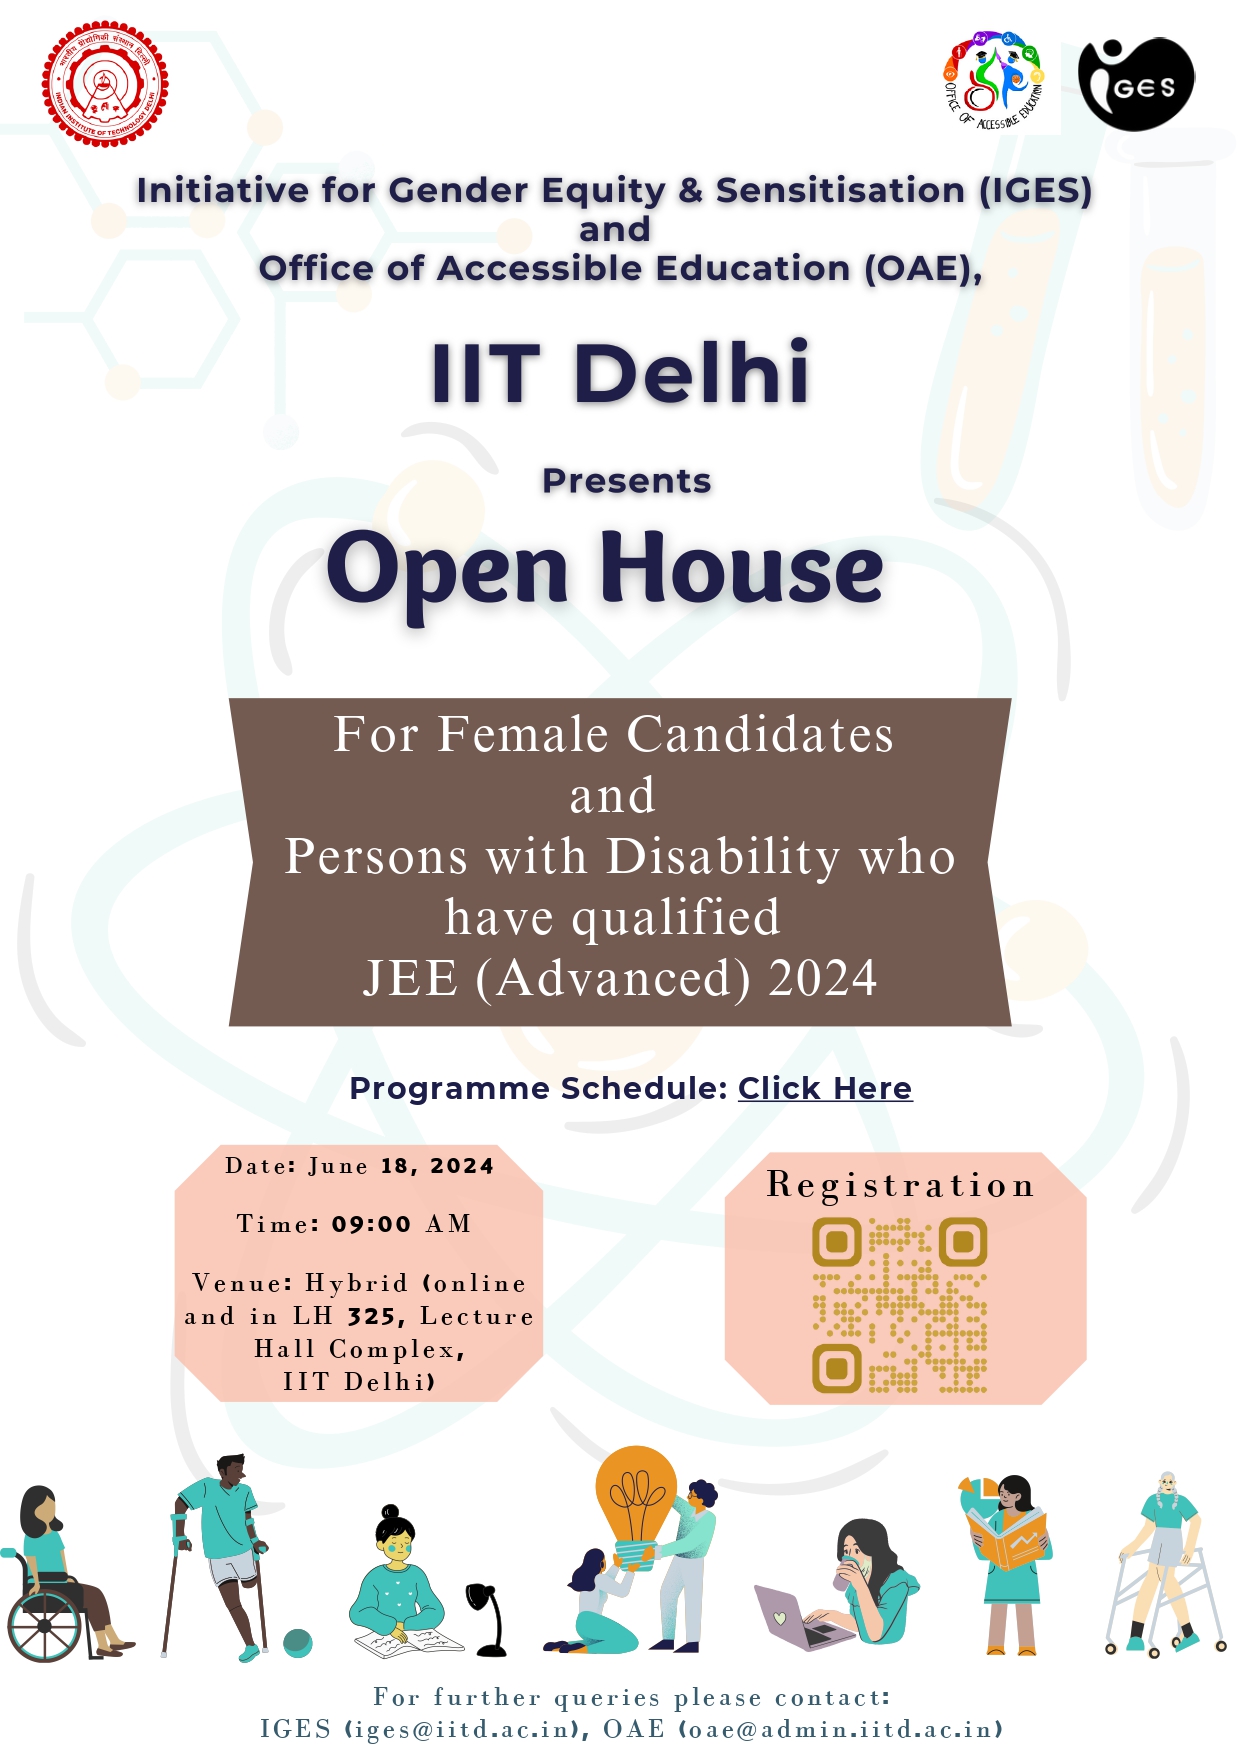 IIT Delhi to Organise Open House for JEE (Advanced) 2024 Qualified